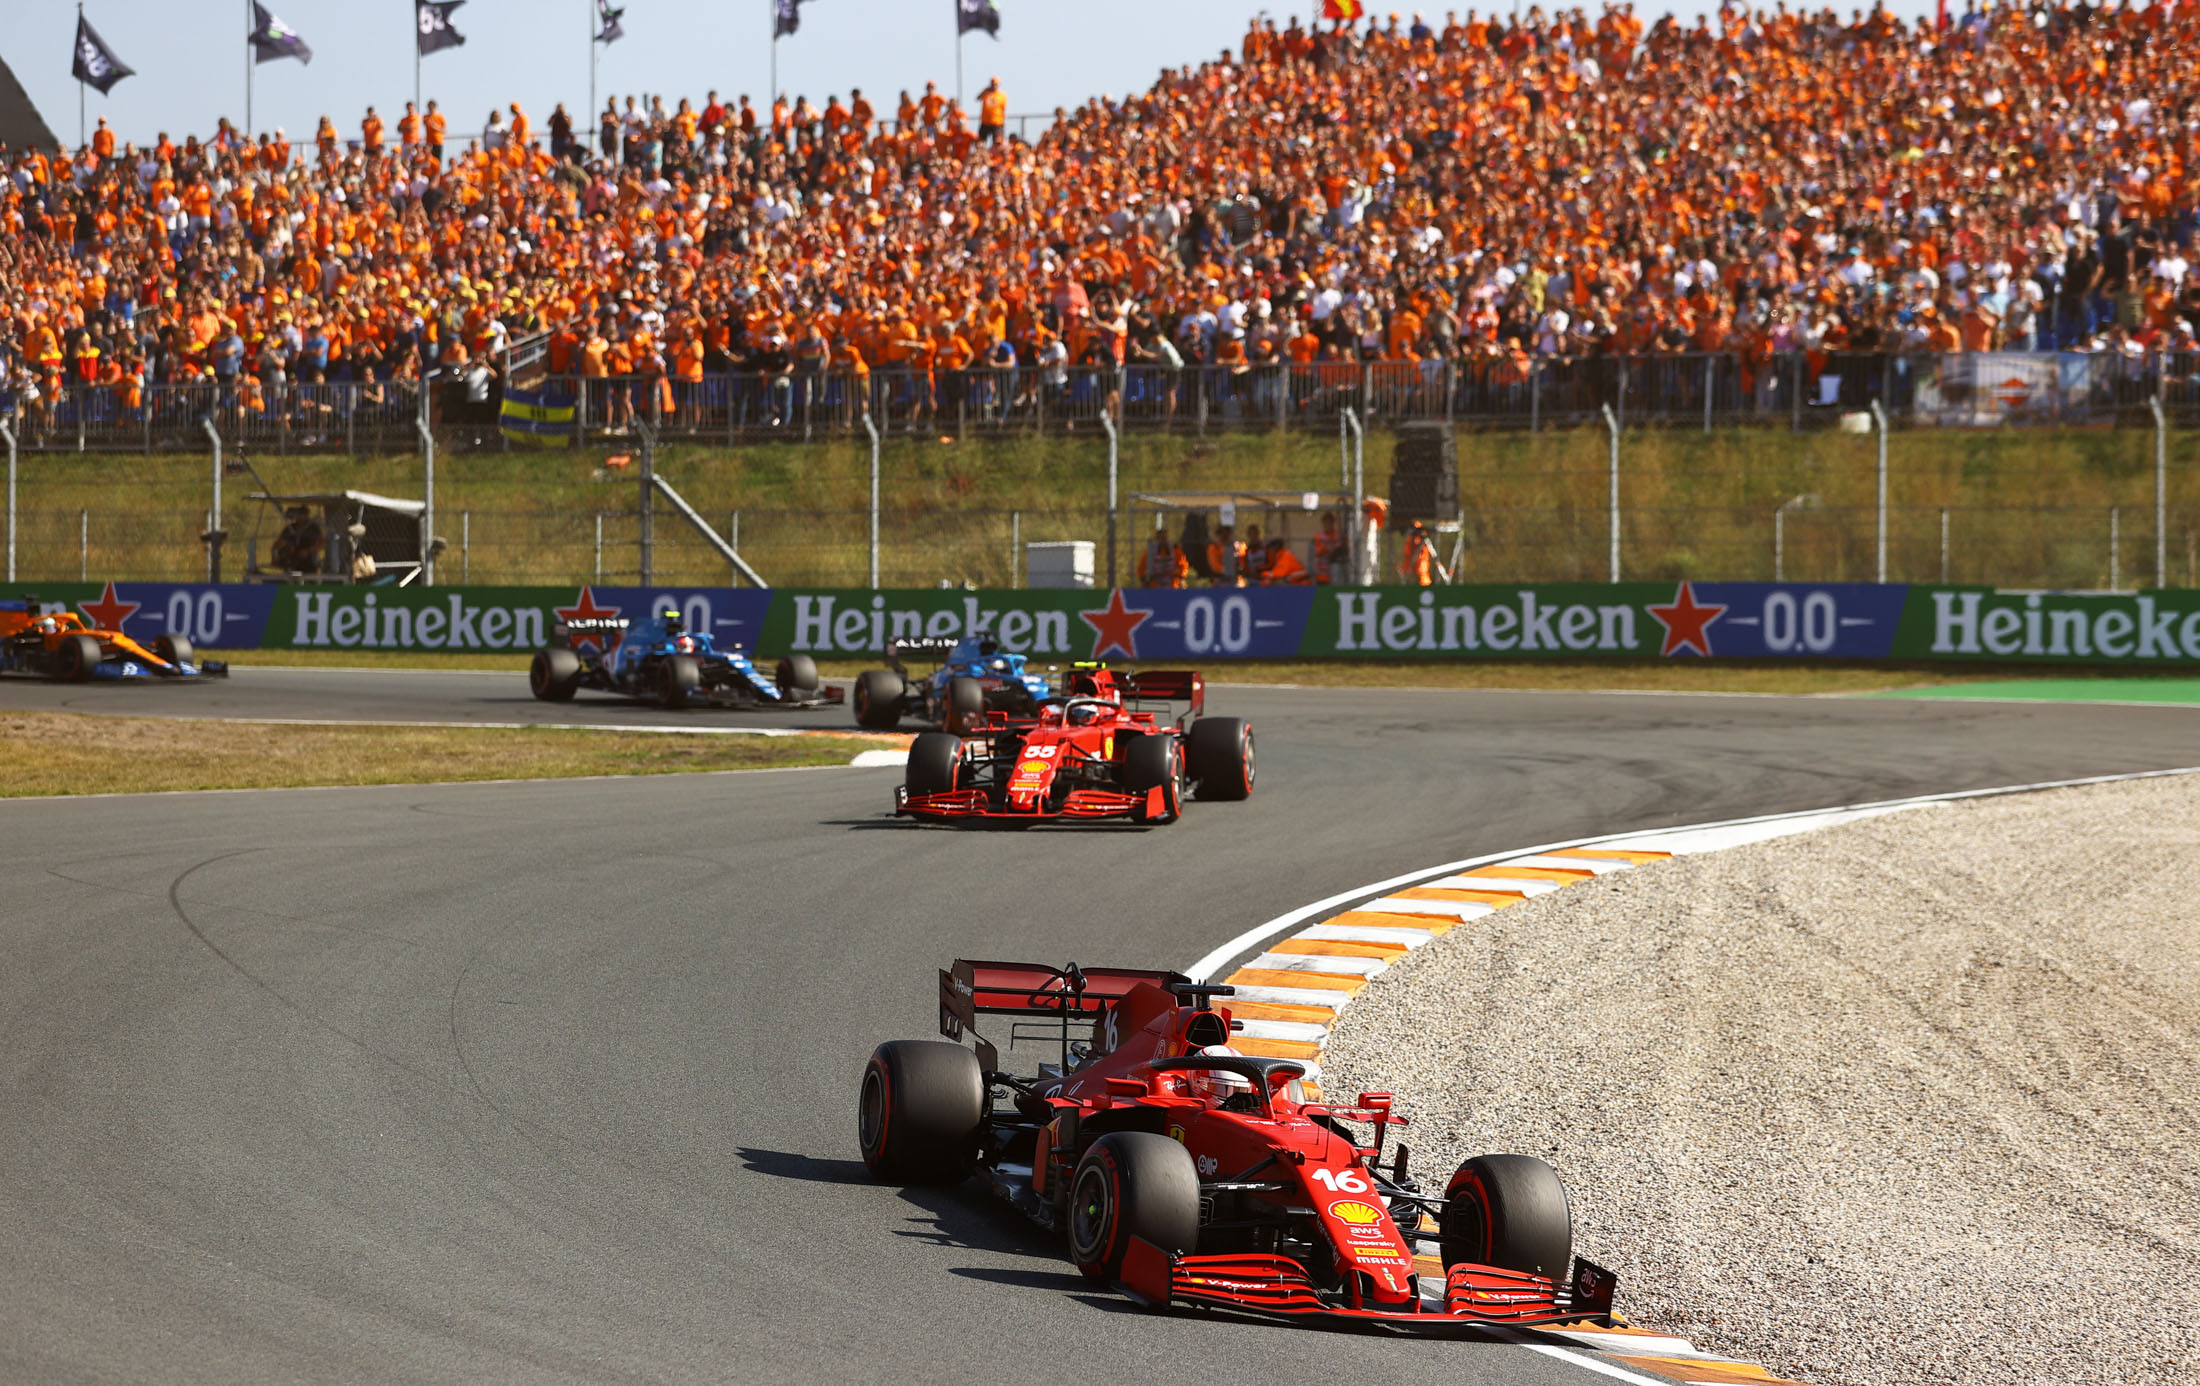 How to Attend a Formula 1 Race Like a Pro Travel Tips, VIP Experiences